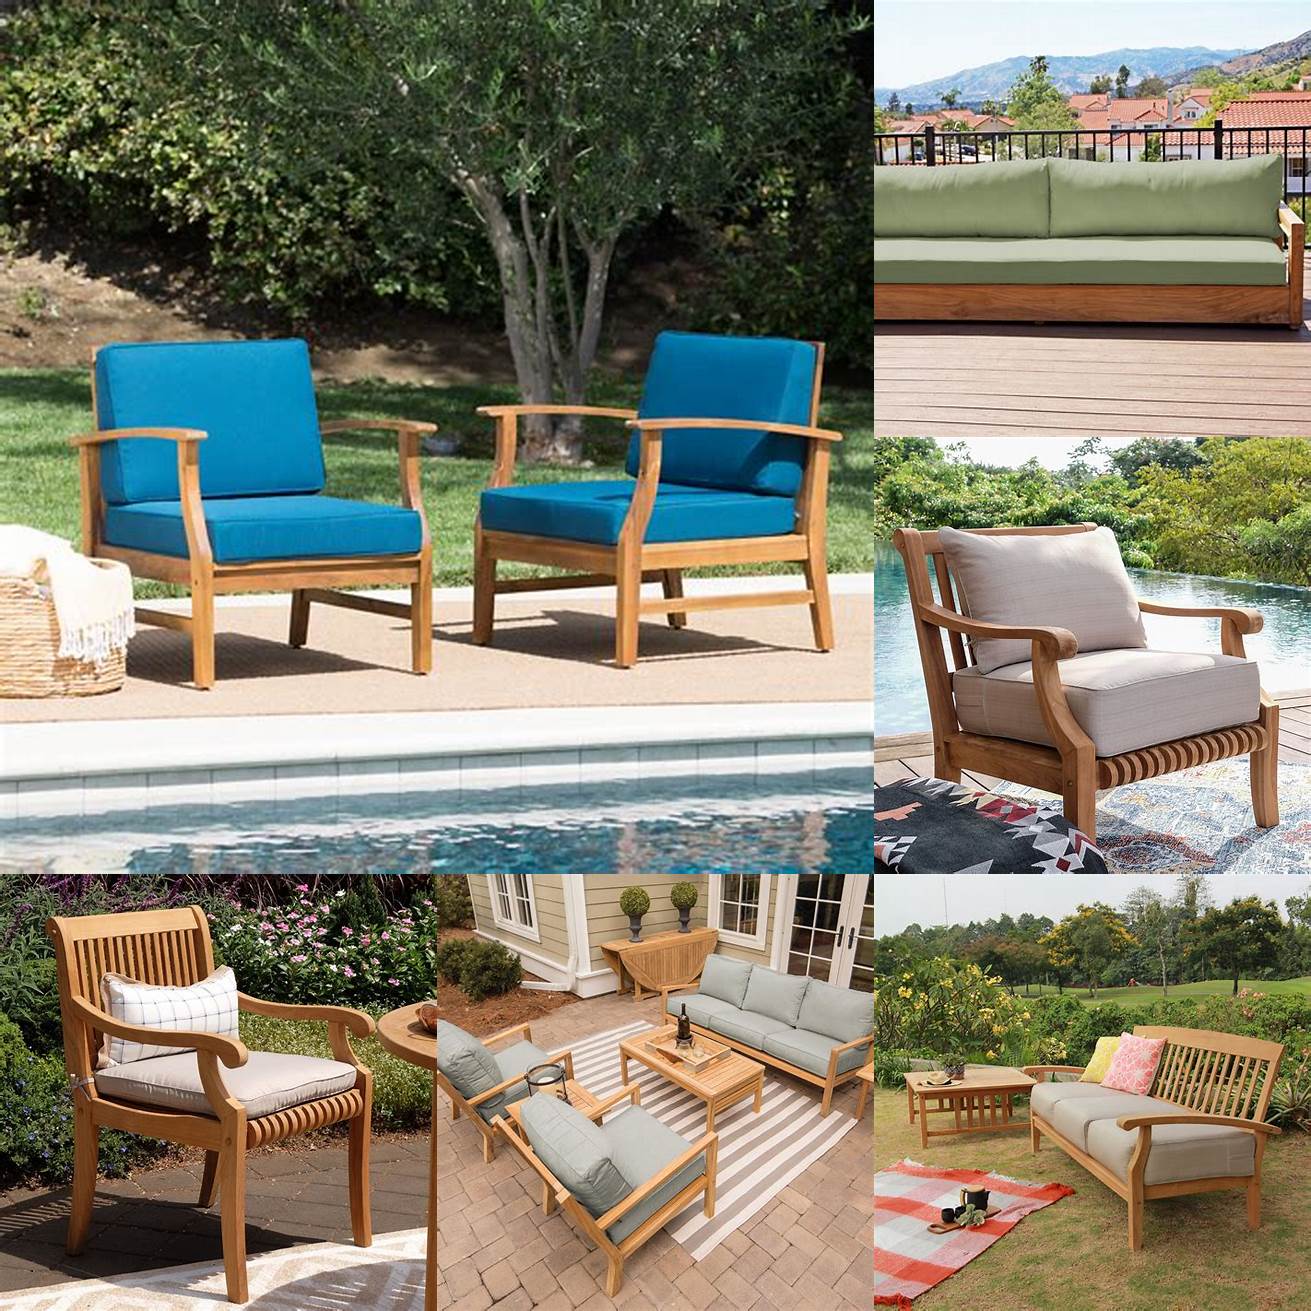 Teak outdoor furniture with cushions